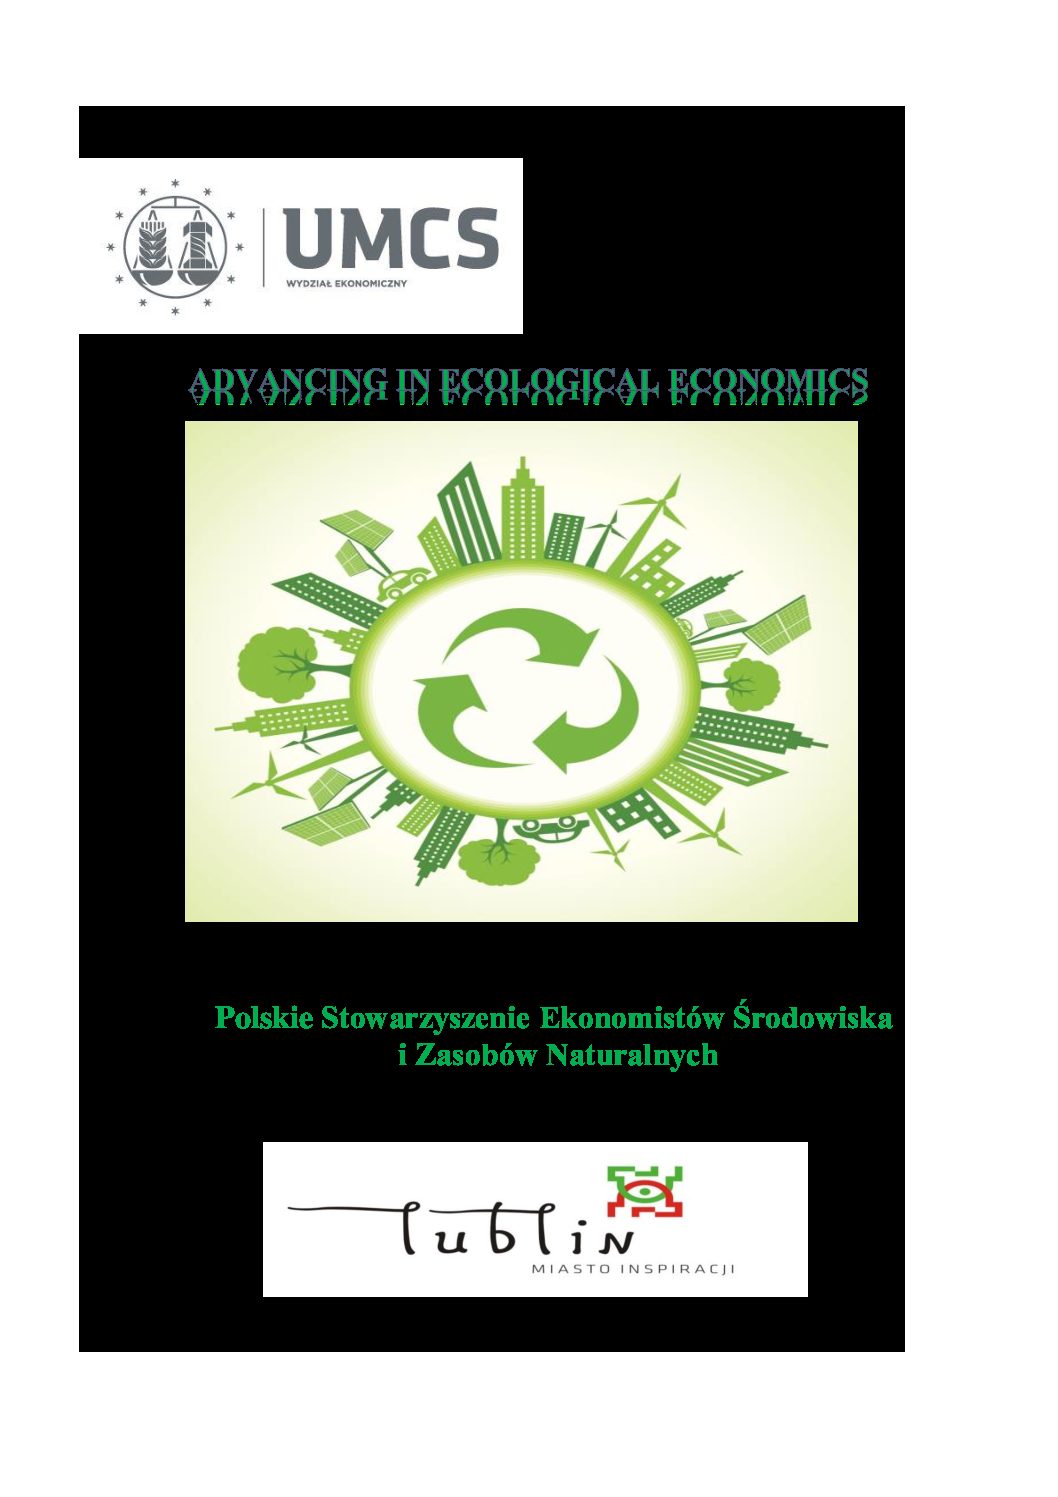 KONFERENCJA „ADVANCING IN ECOLOGICAL ECONOMICS”, Lublin 15.09.2020 r.